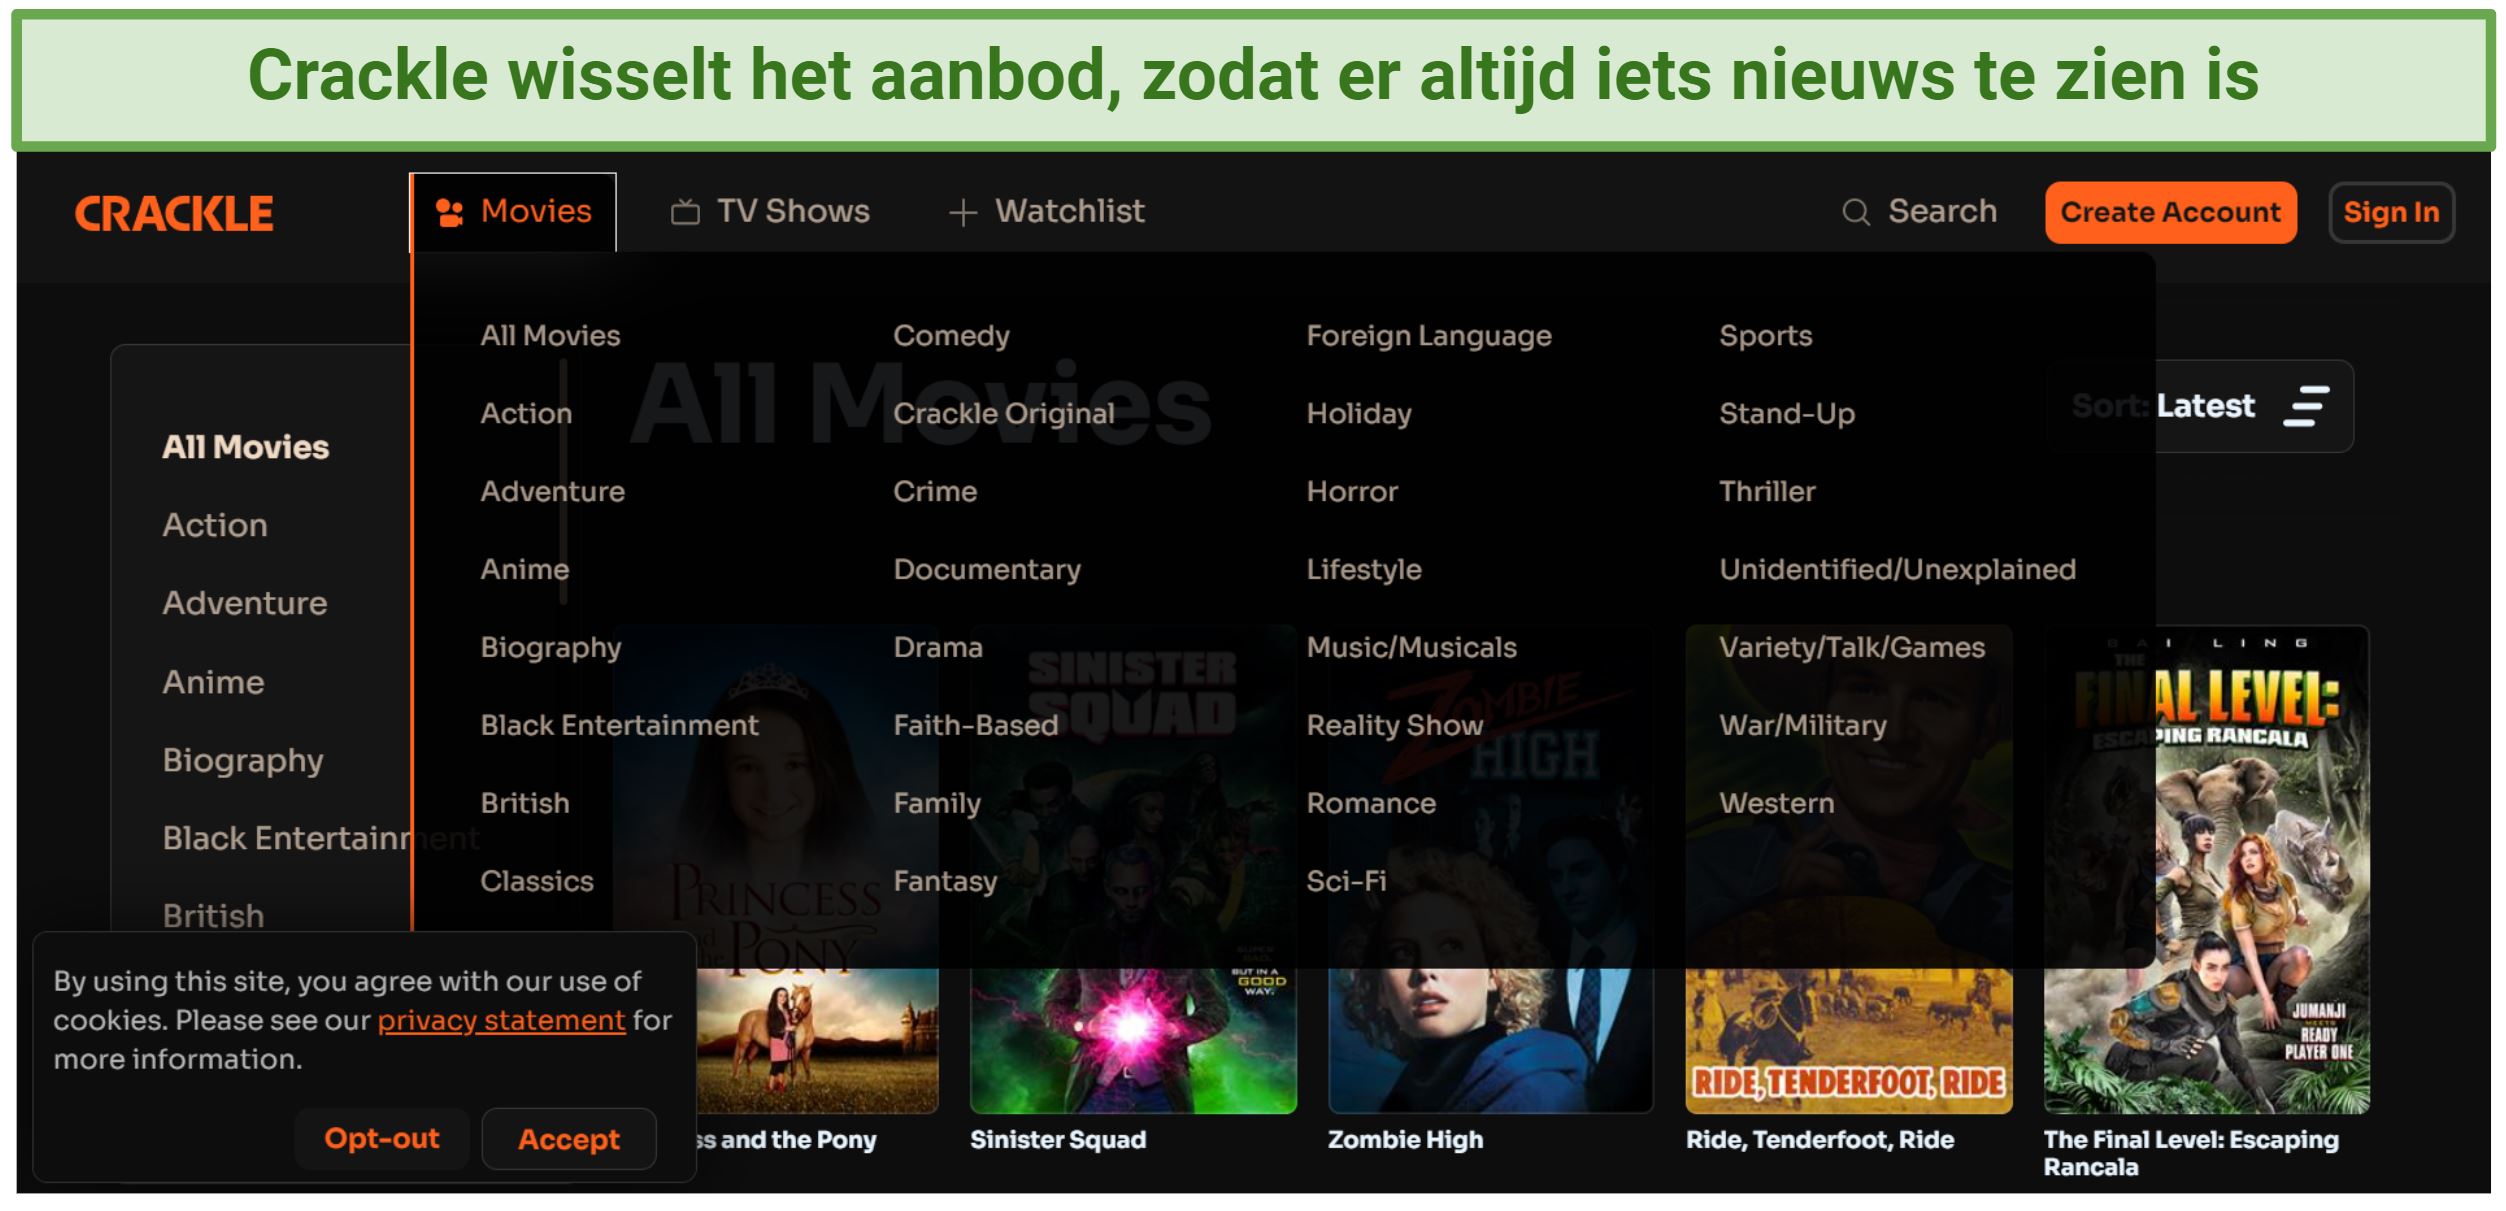 Screenshot of Crackle's interface showing all the content categories